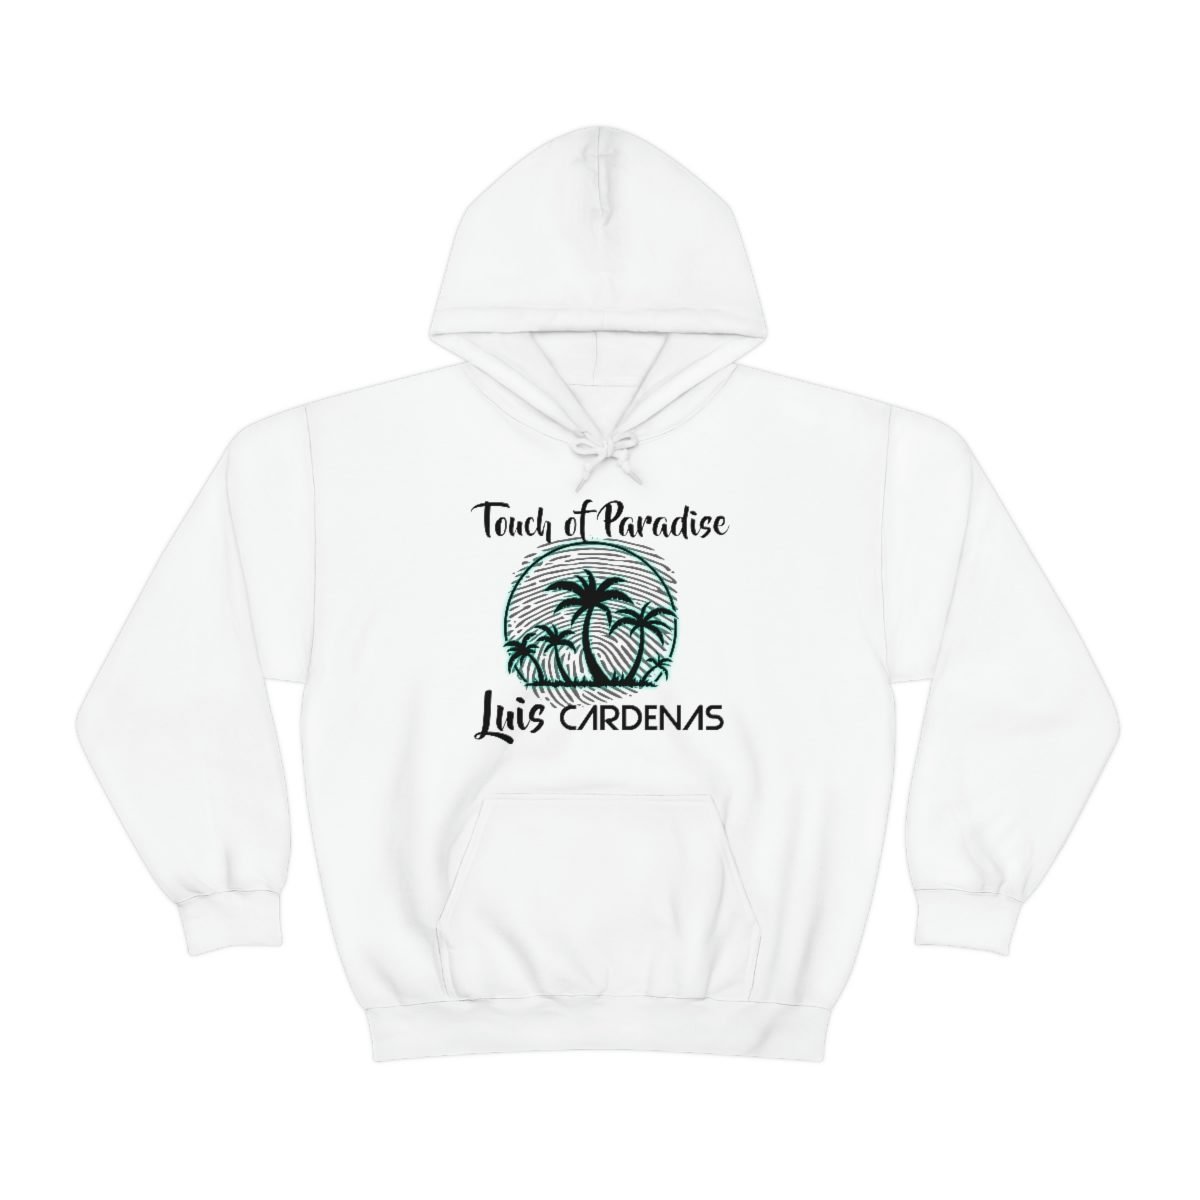 Luis Cardenas – Touch of Paradise Pullover Hooded Sweatshirt